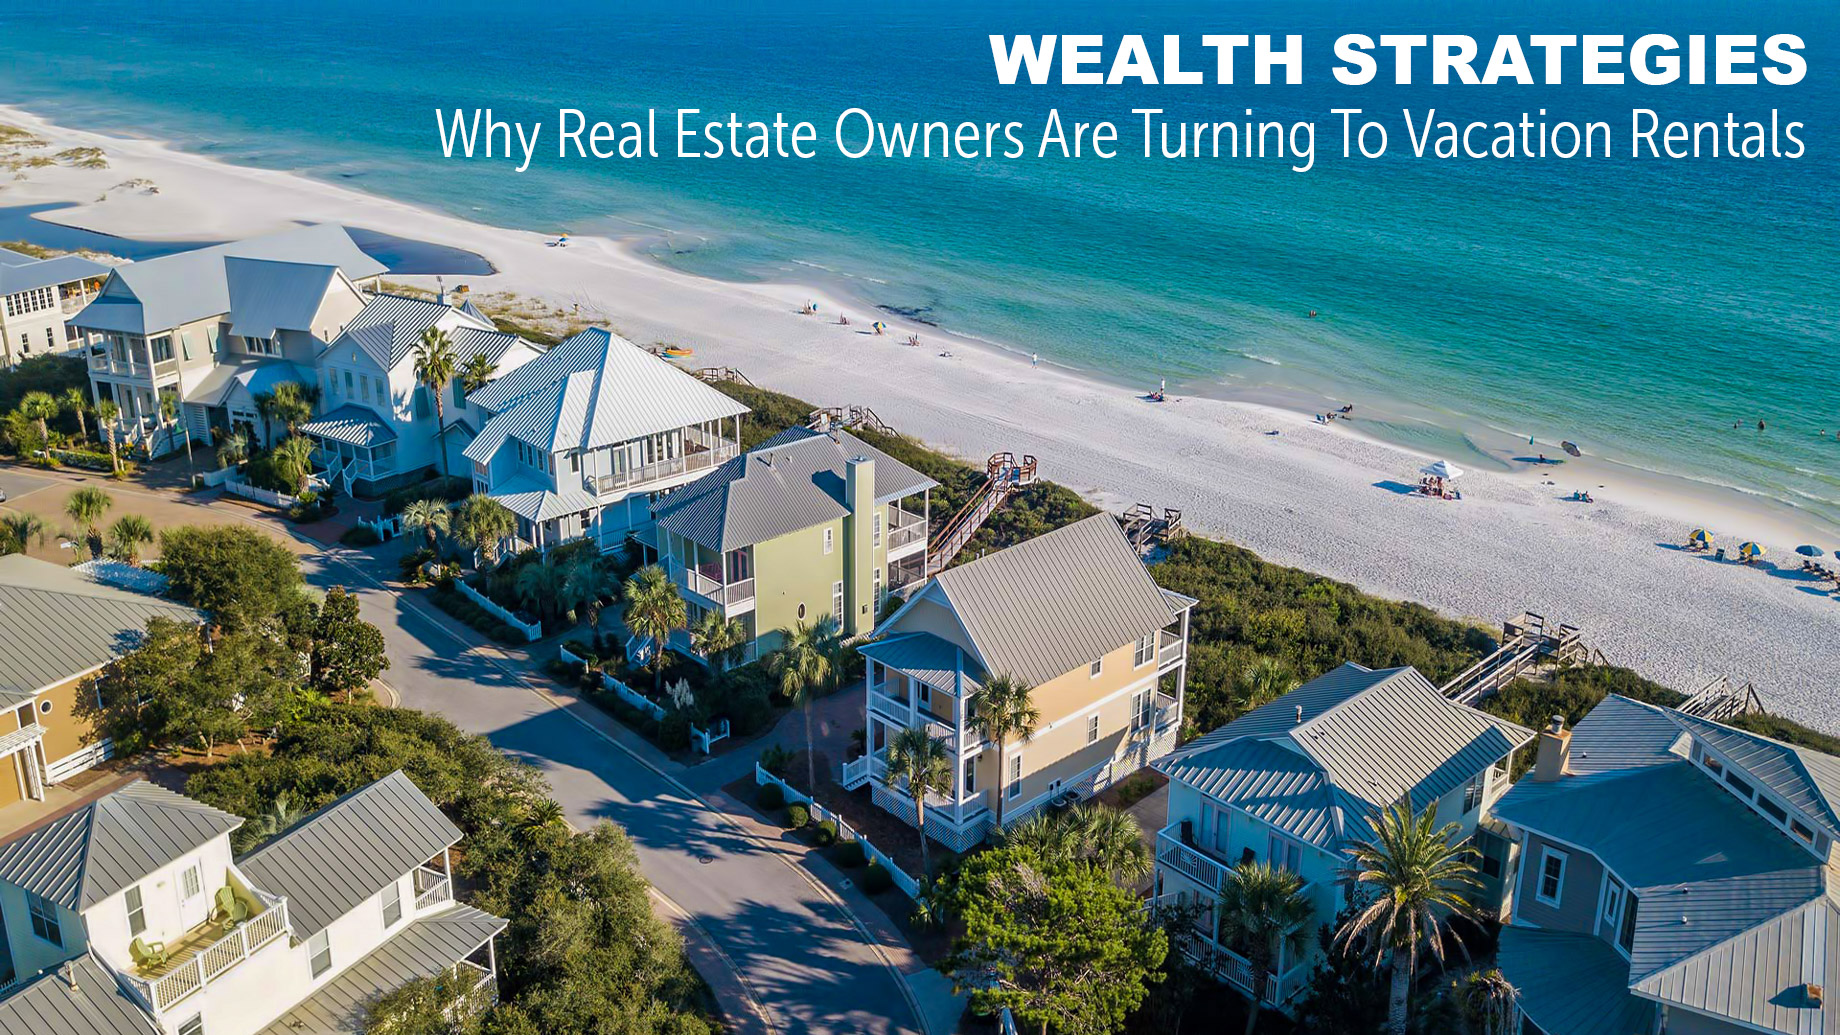 Wealth Strategies - Why Real Estate Owners Are Turning To Vacation Rentals